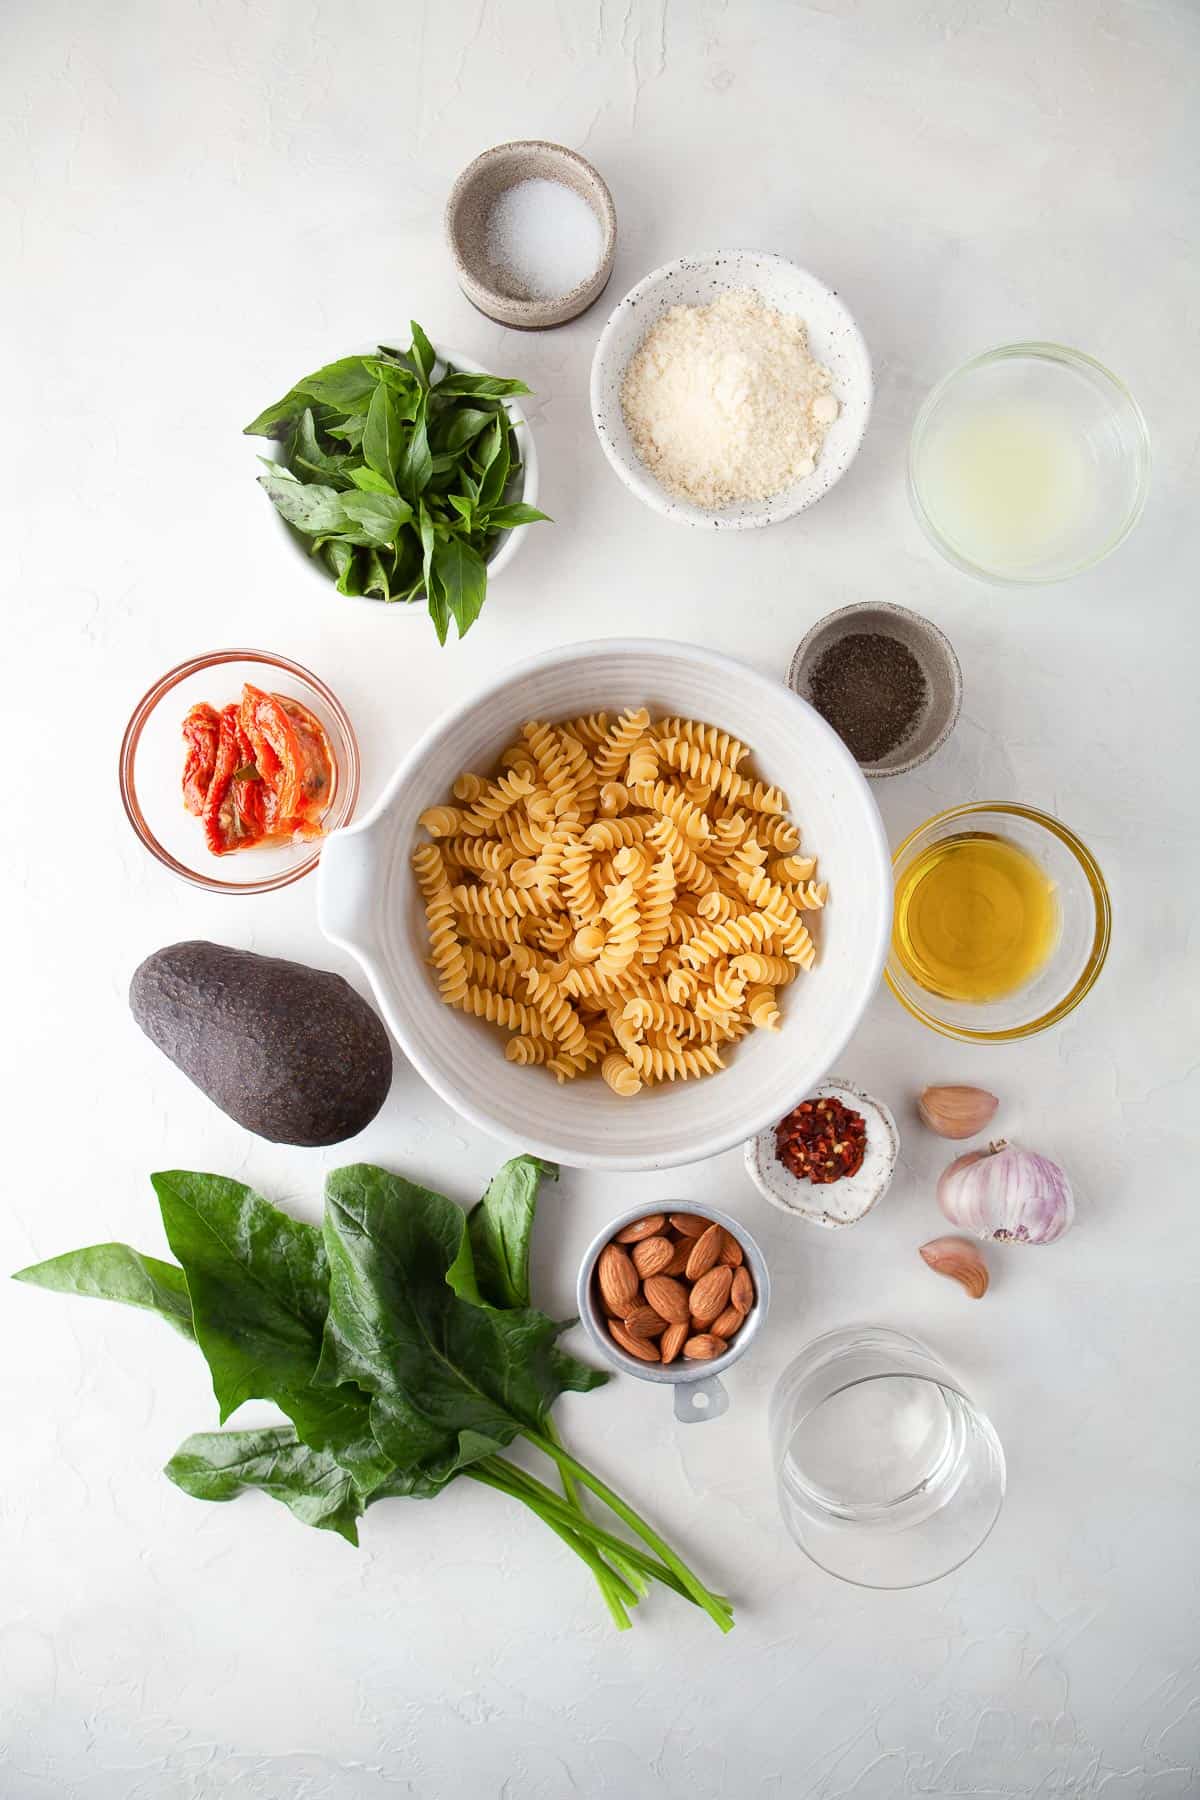 ingredients laid out to make home pesto and pasta